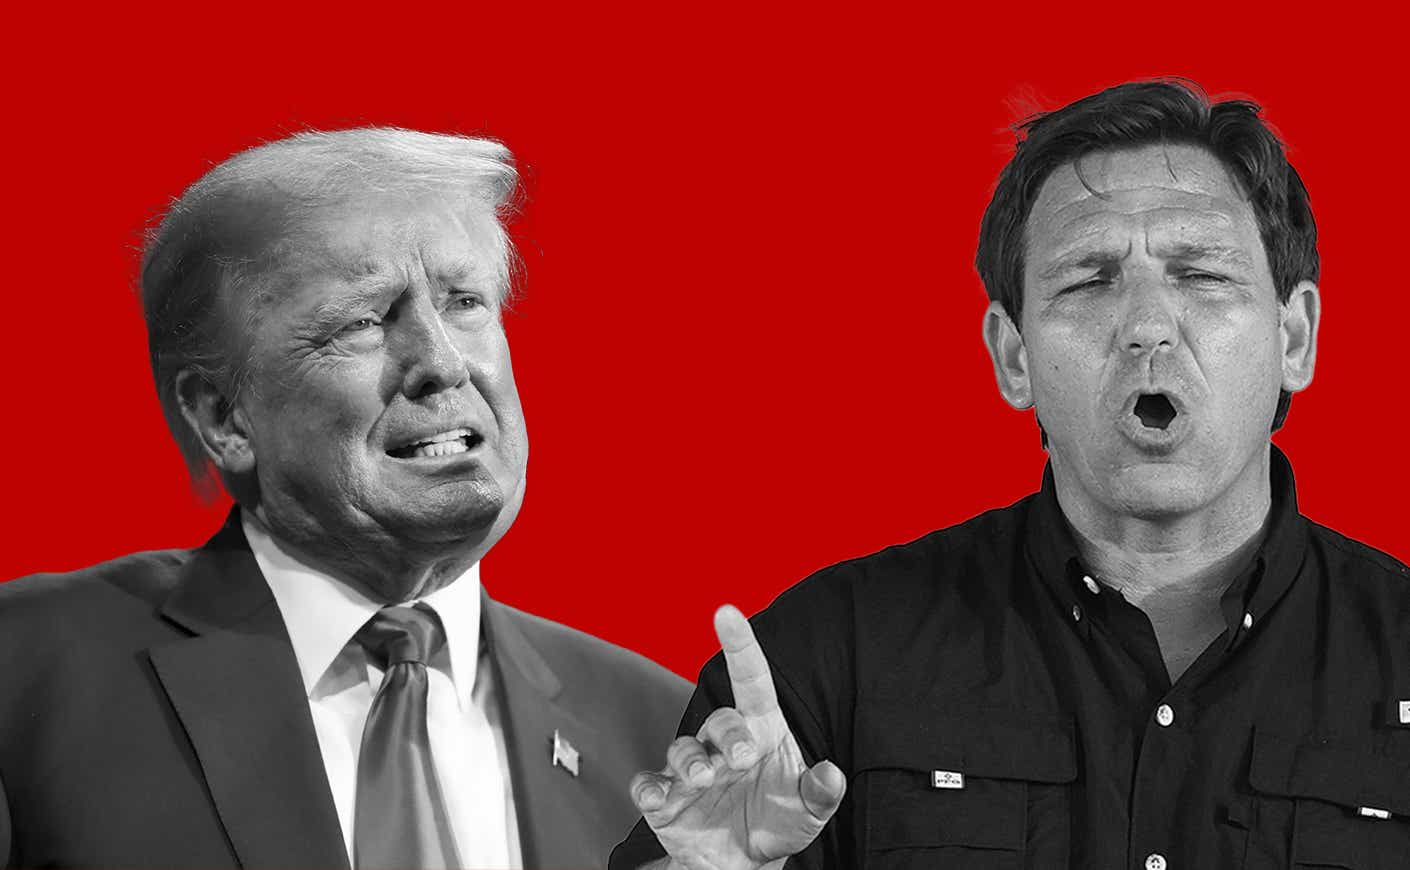 Black-and-white images of Donald Trump and Ron DeSantis over red background